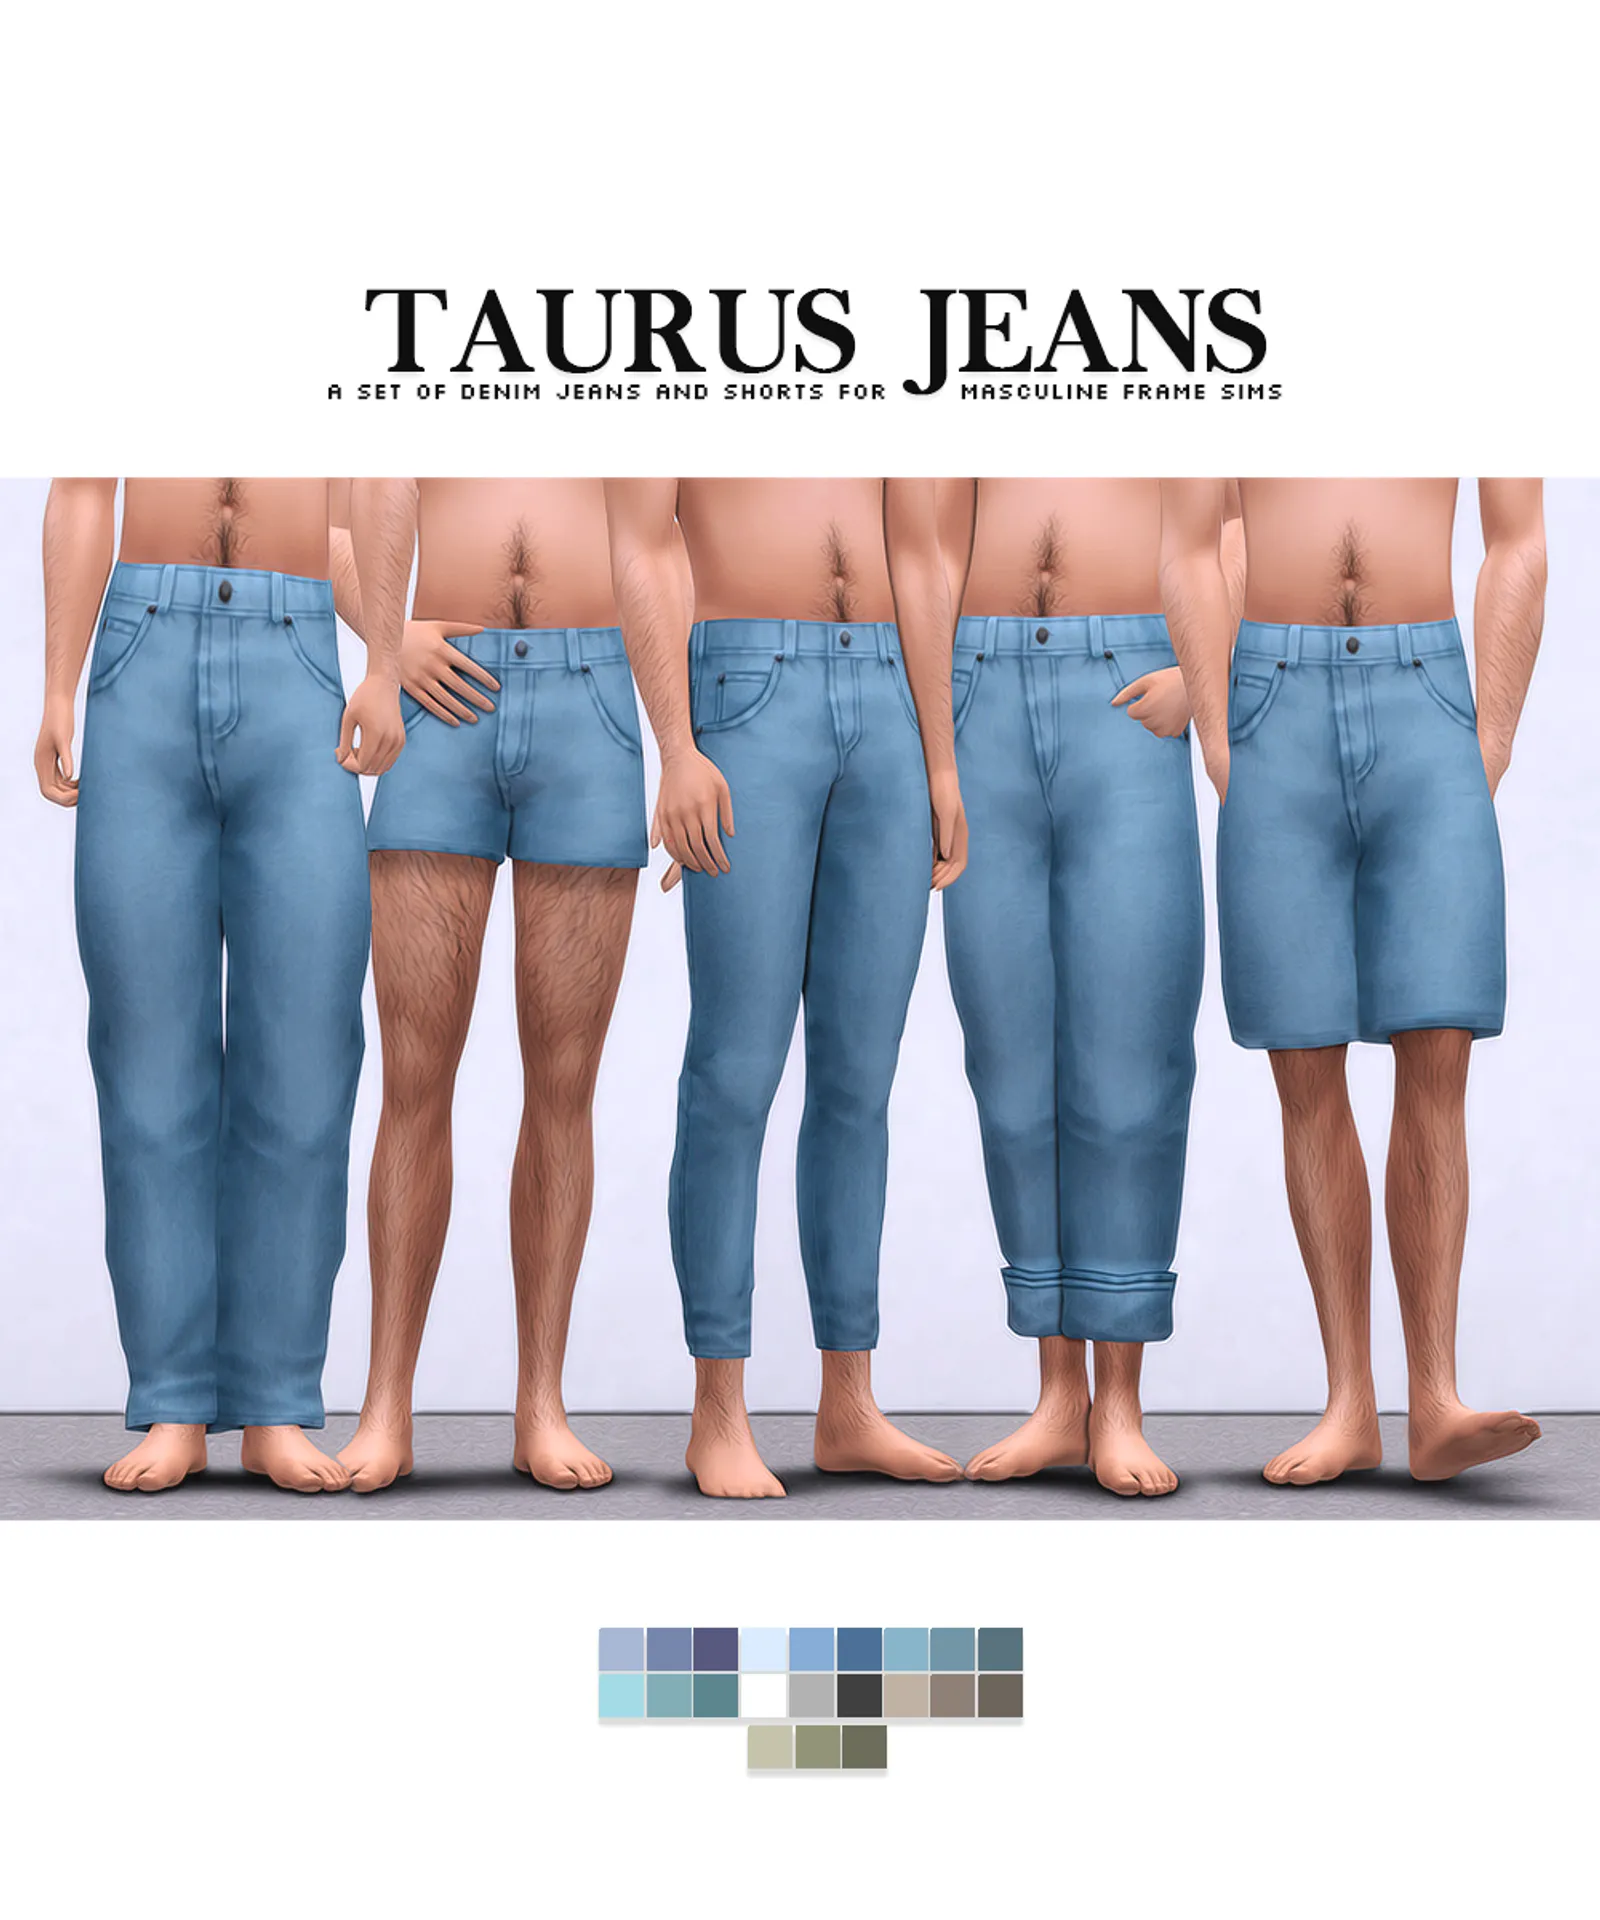 Taurus Jeans by @nucrests